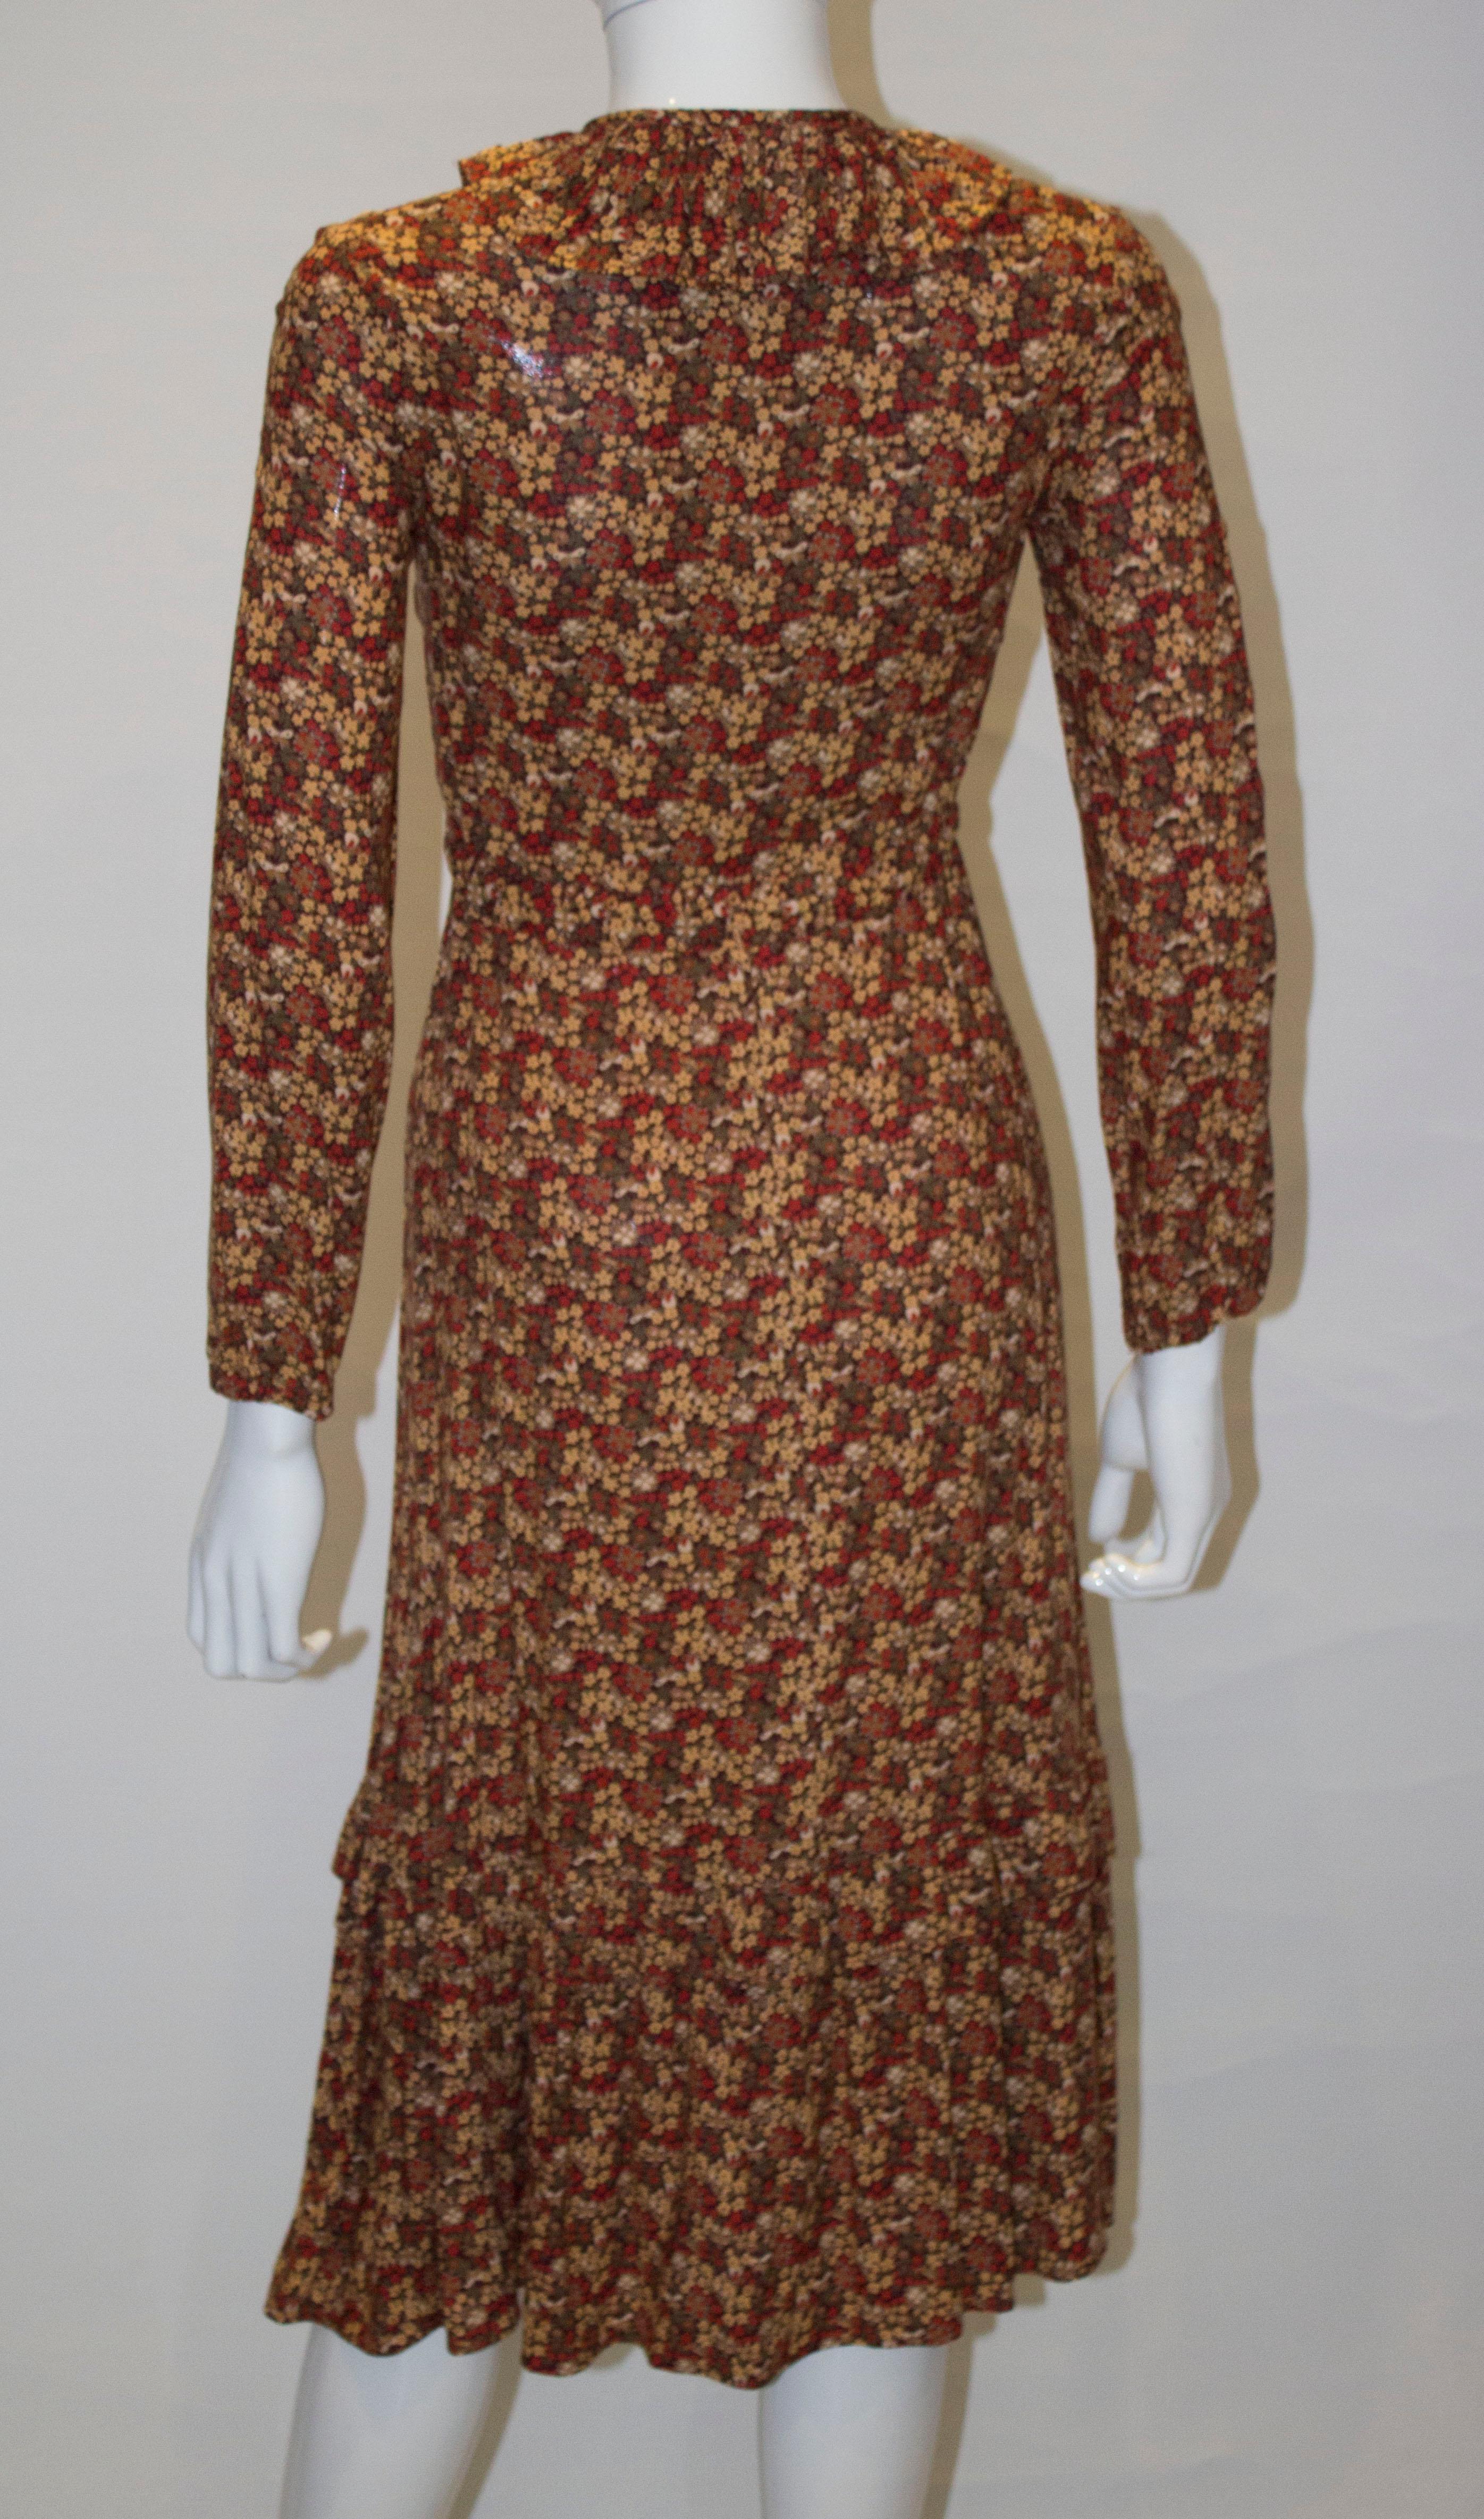 Vintage 1970s Floral Print Dress with Frill Collar For Sale 3